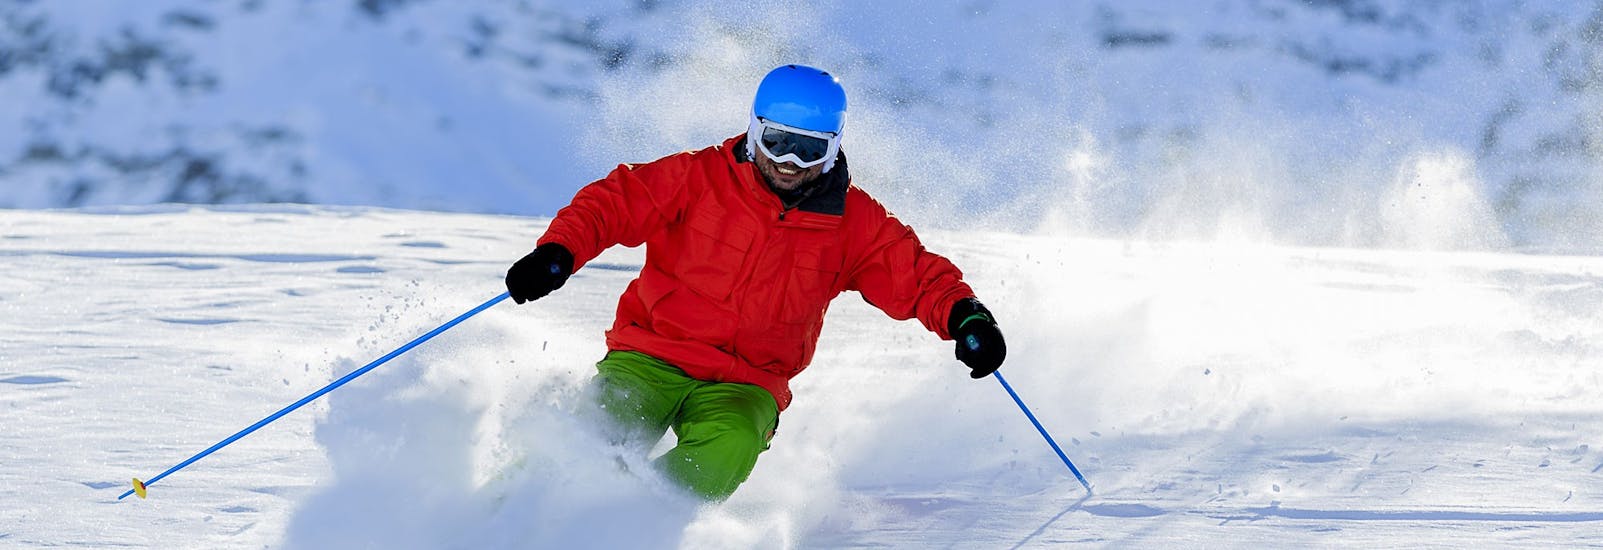 Skier carving down slope during the Private Ski Lessons for Adults of All Levels with G&S snowsportschool Mitterdorf.